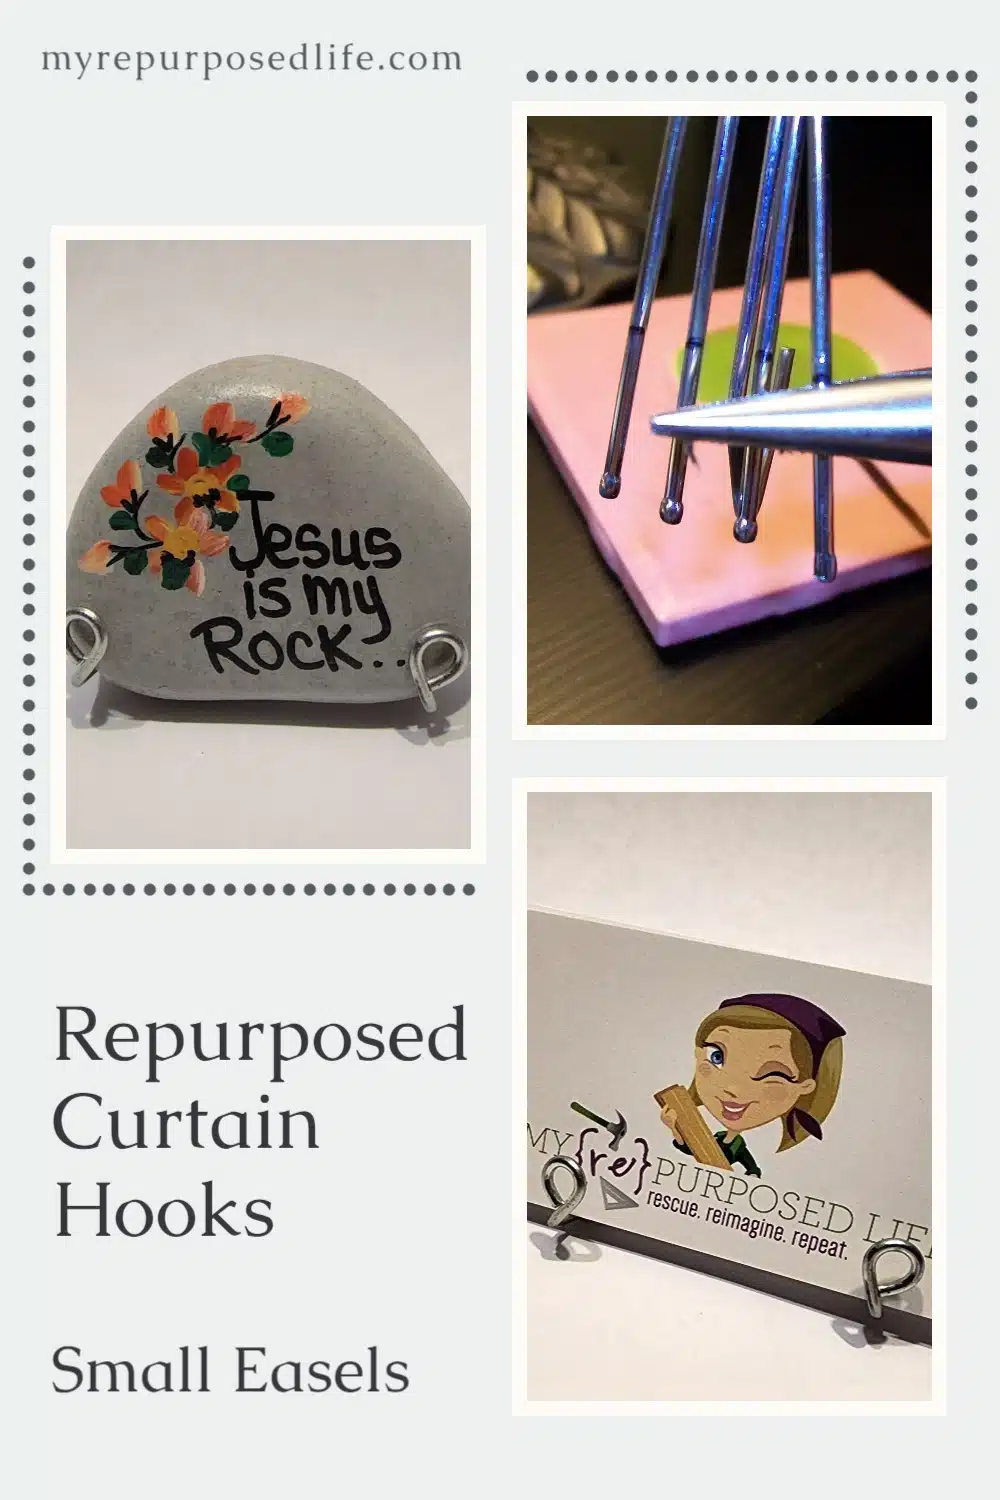 Drapery hooks repurposed into small easels, perfect for biz cards, small plaques, cd covers and more. Step by step directions. #myrepurposedlife #upcycle #curtainhooks #draperyhooks #diy #easels #display via @repurposedlife